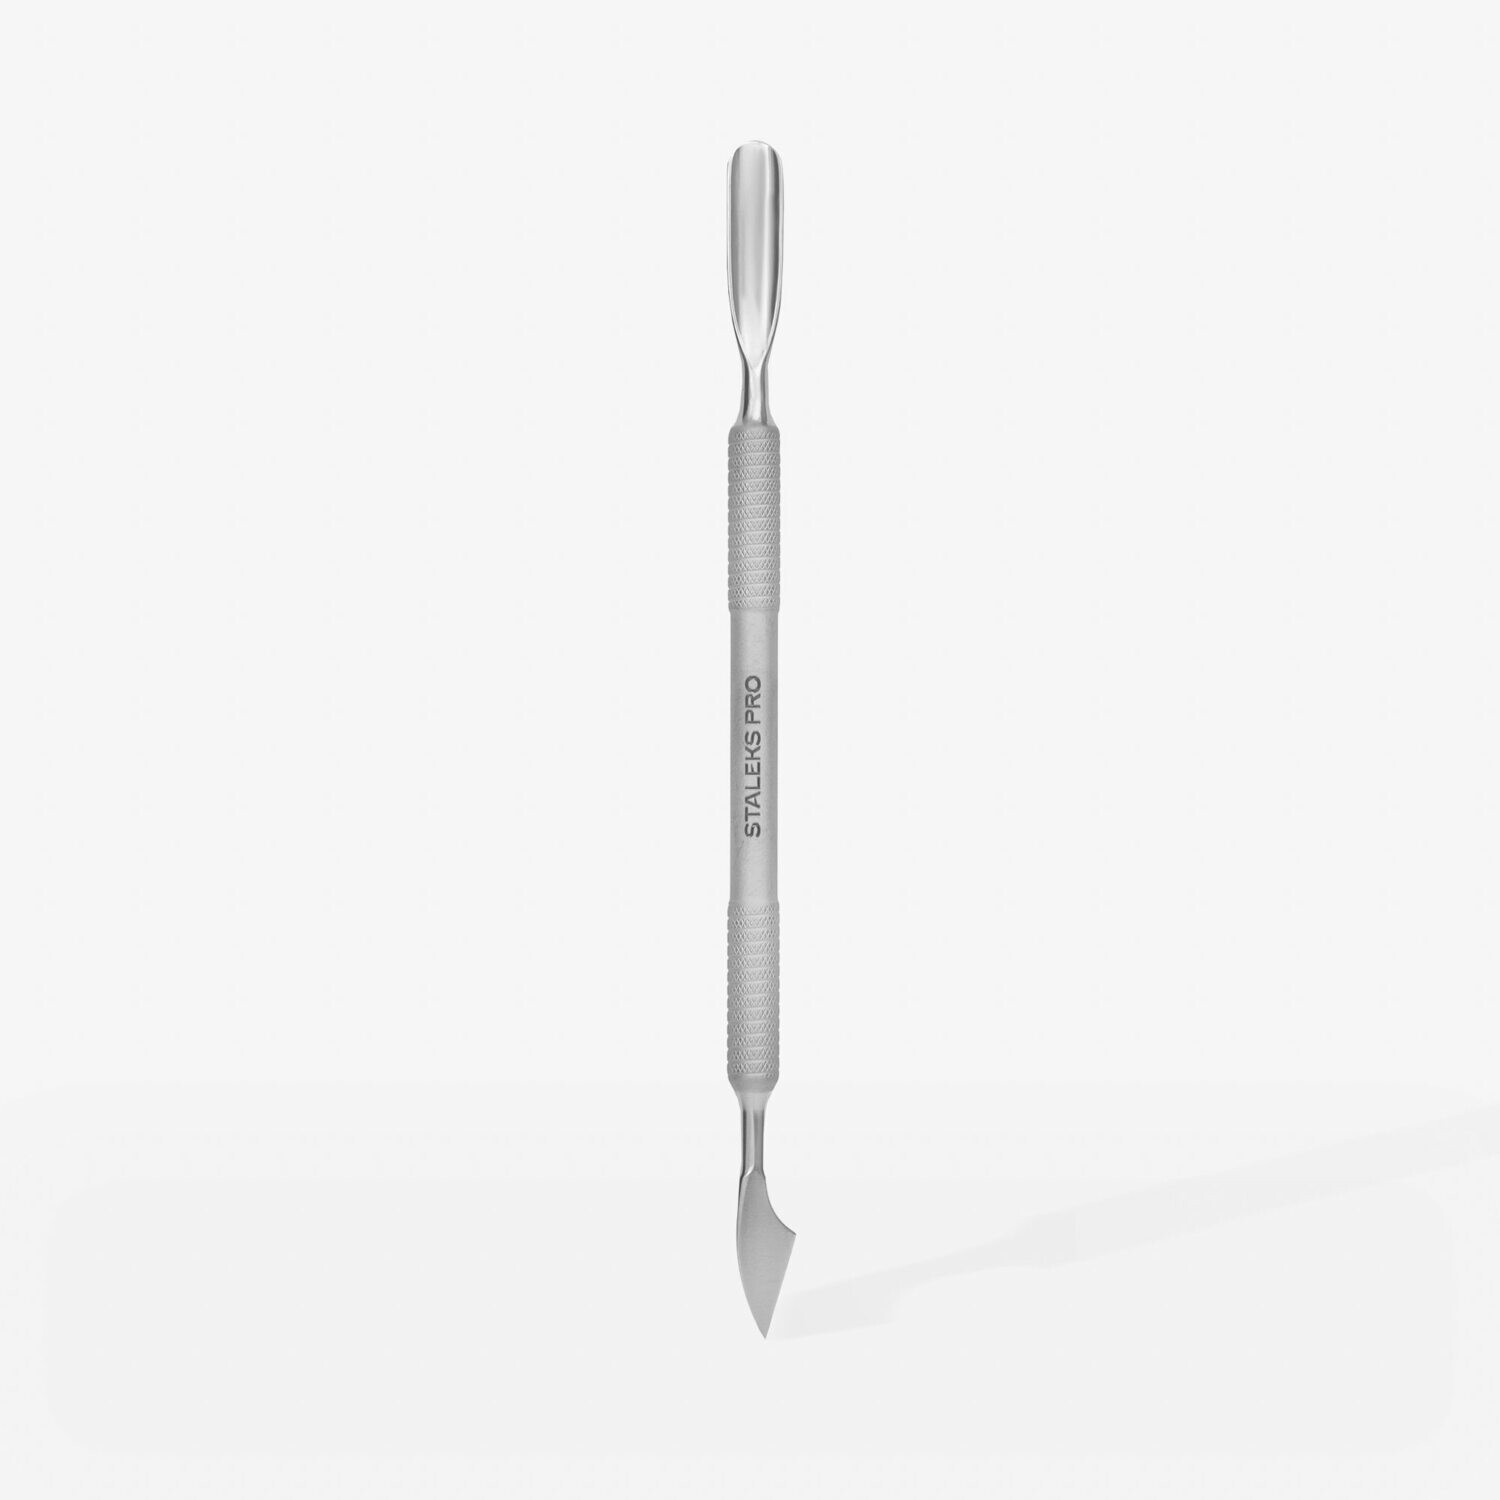 Cuticle pusher Staleks Pro Smart 50 Type 2 (rounded pusher and remover)